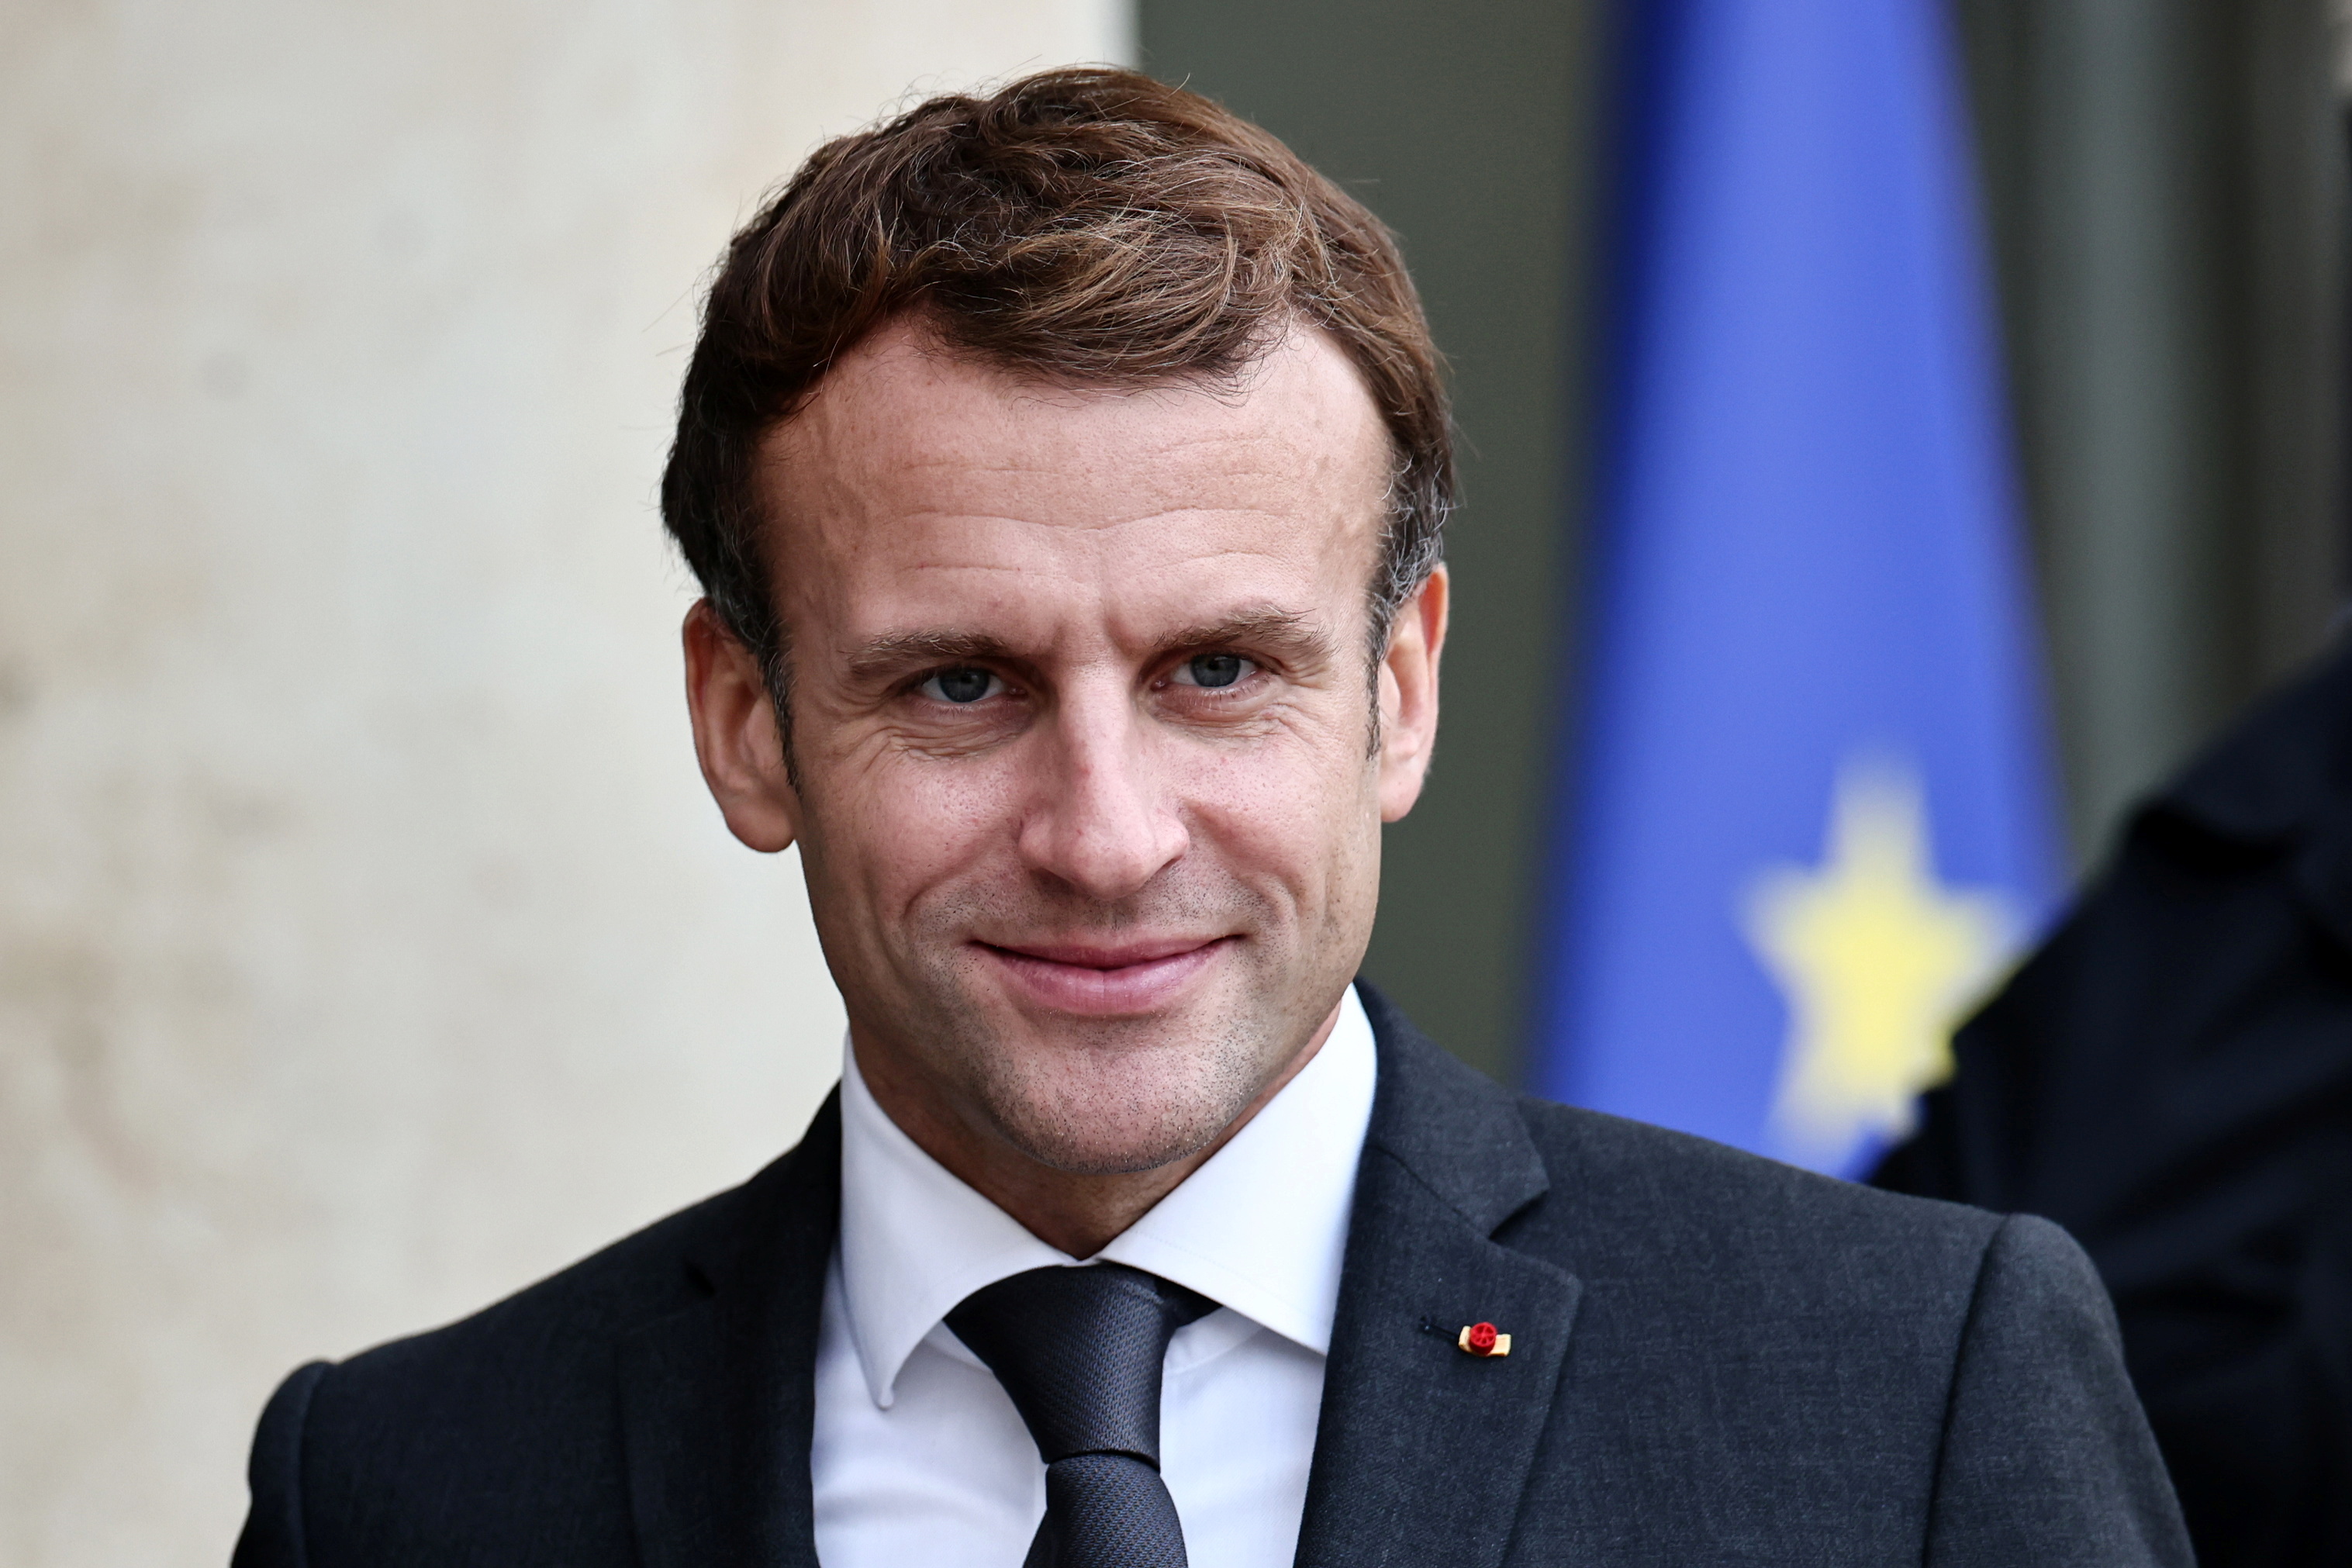 French President Emmanuel Macron at the Elysee Palace in Paris